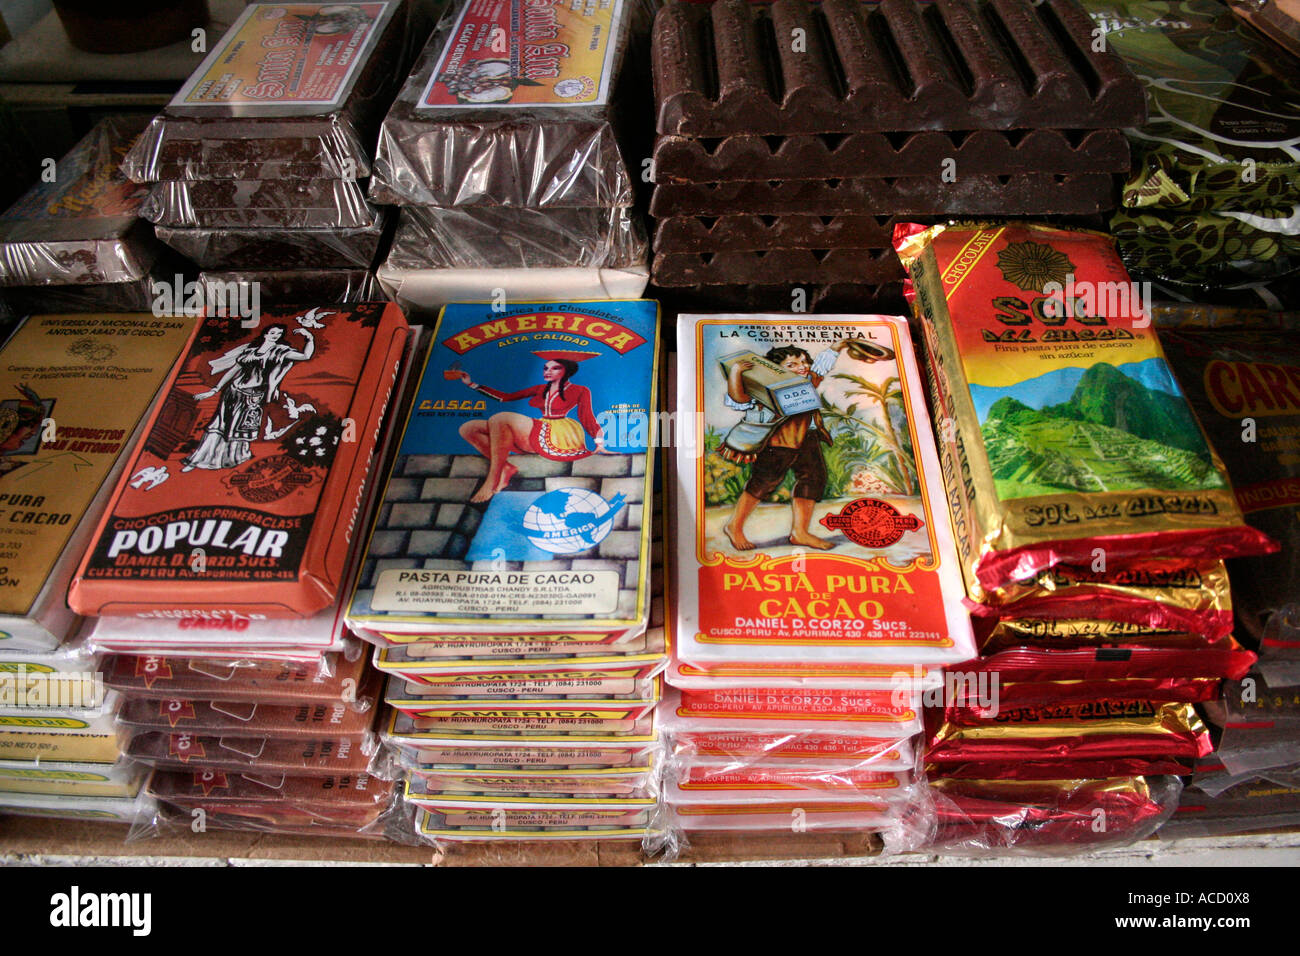 Local chocolate bars on display at central market in Cuzco, Peru Stock Photo